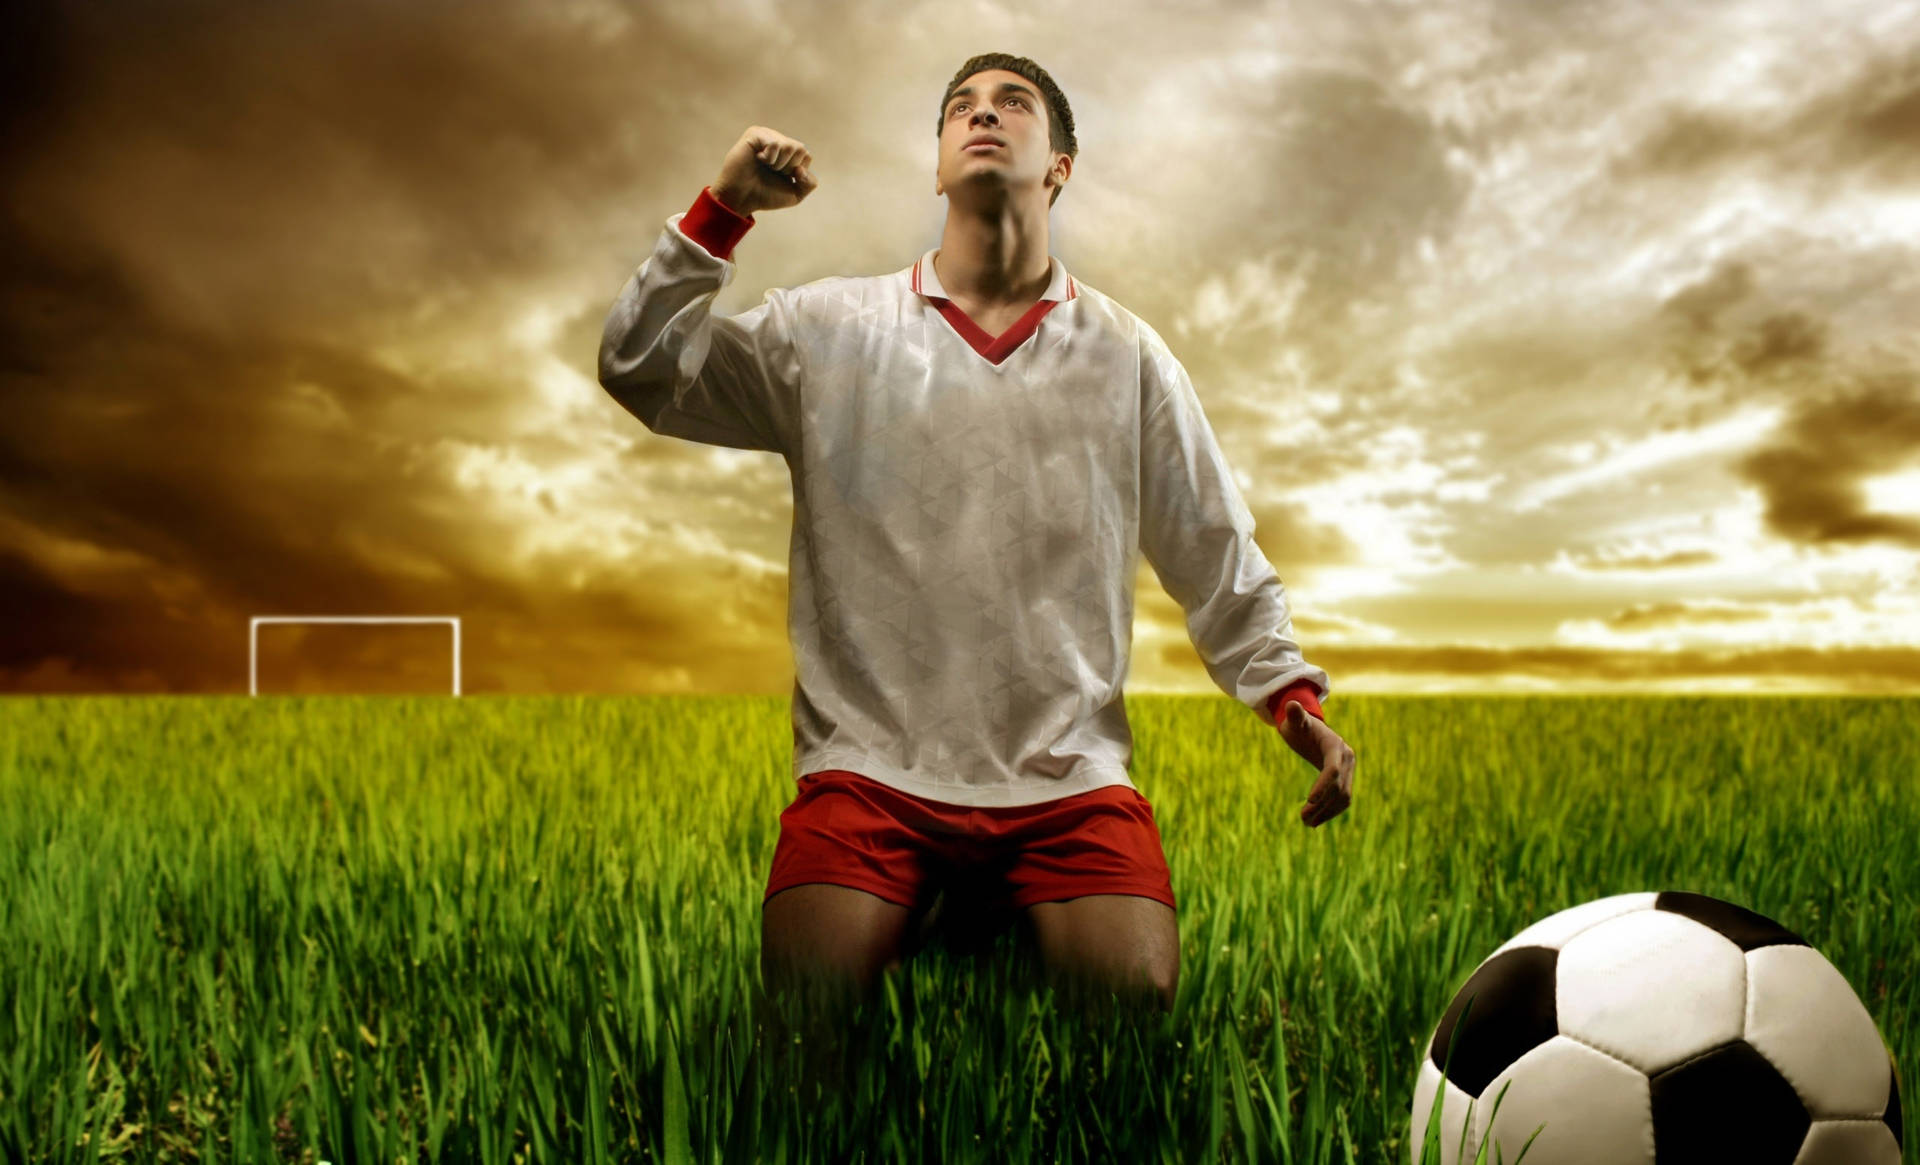 Cool Soccer Player Grassy Fields Background